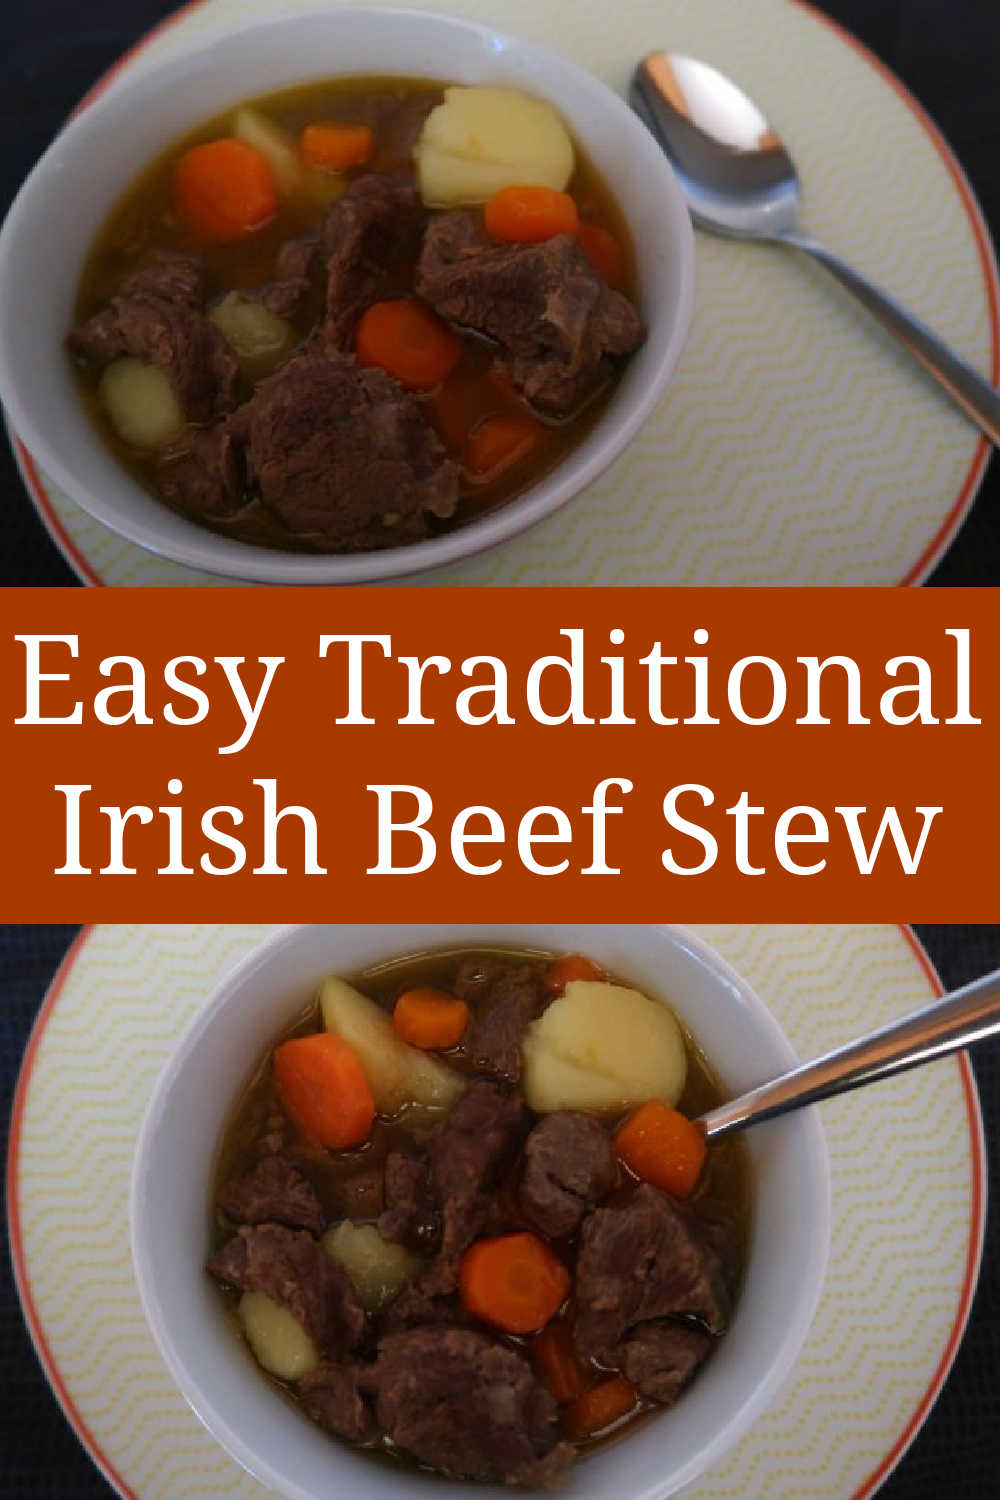 Irish Beef Stew Recipe - Easy Authentic & Traditional Irish Stew With Beef - the perfect winter warmer dinner meal idea.